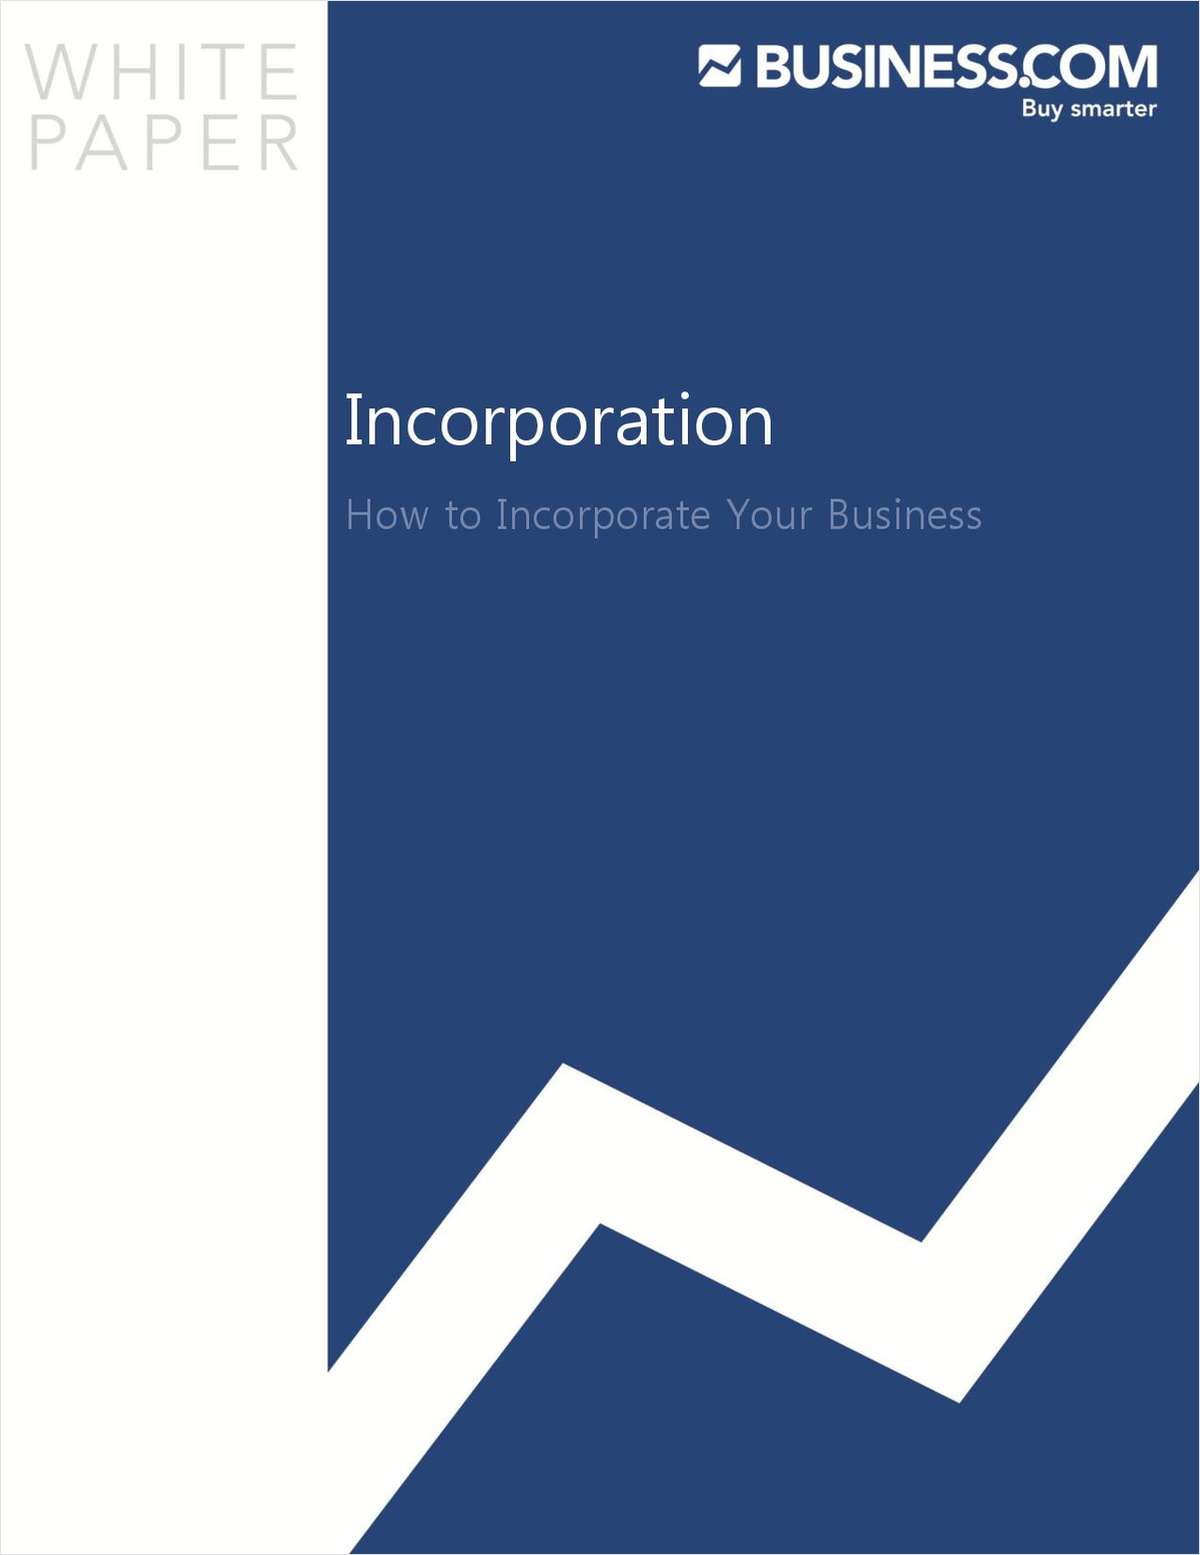 Choosing the Right Incorporation For Your Business